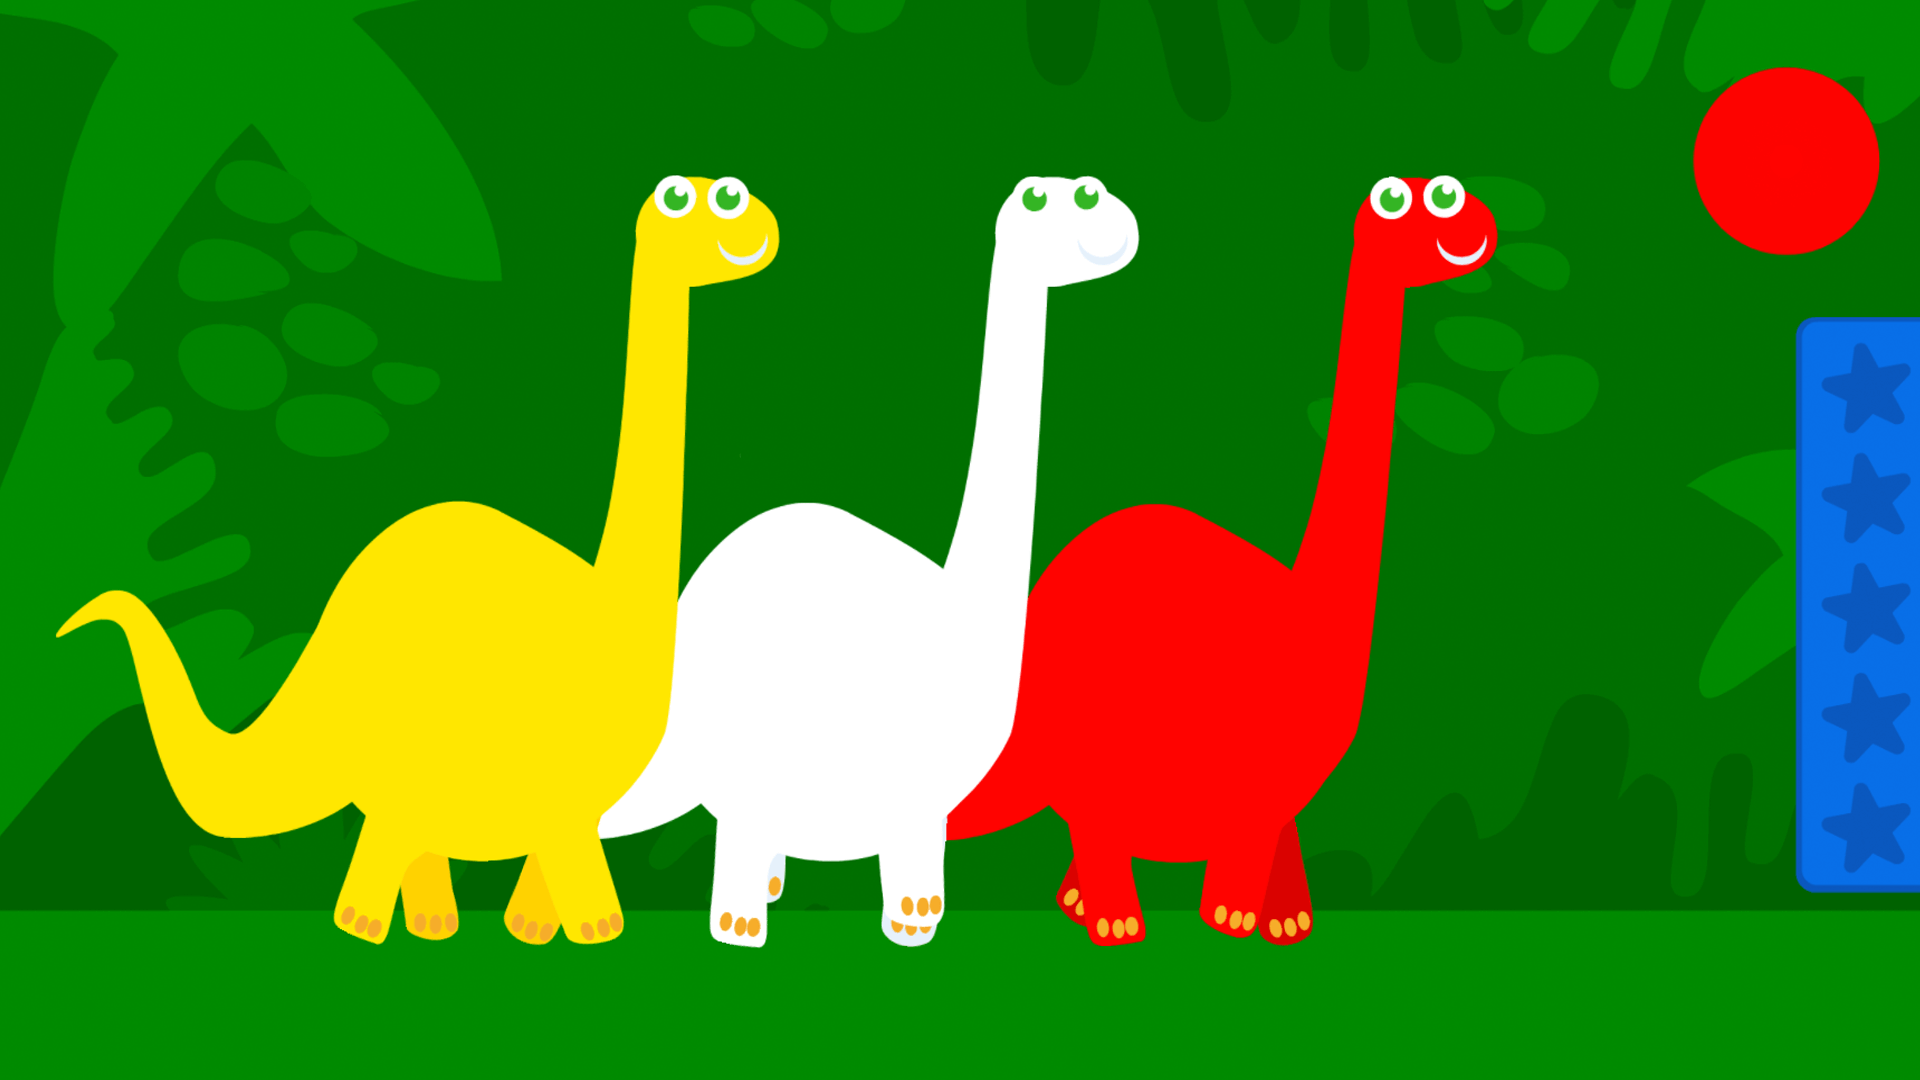 learn numbers, learn counting, game for baby, game for toddlers, dinosaurs, trex, raptor, brachiasuarus, brontosaurus, triceratops